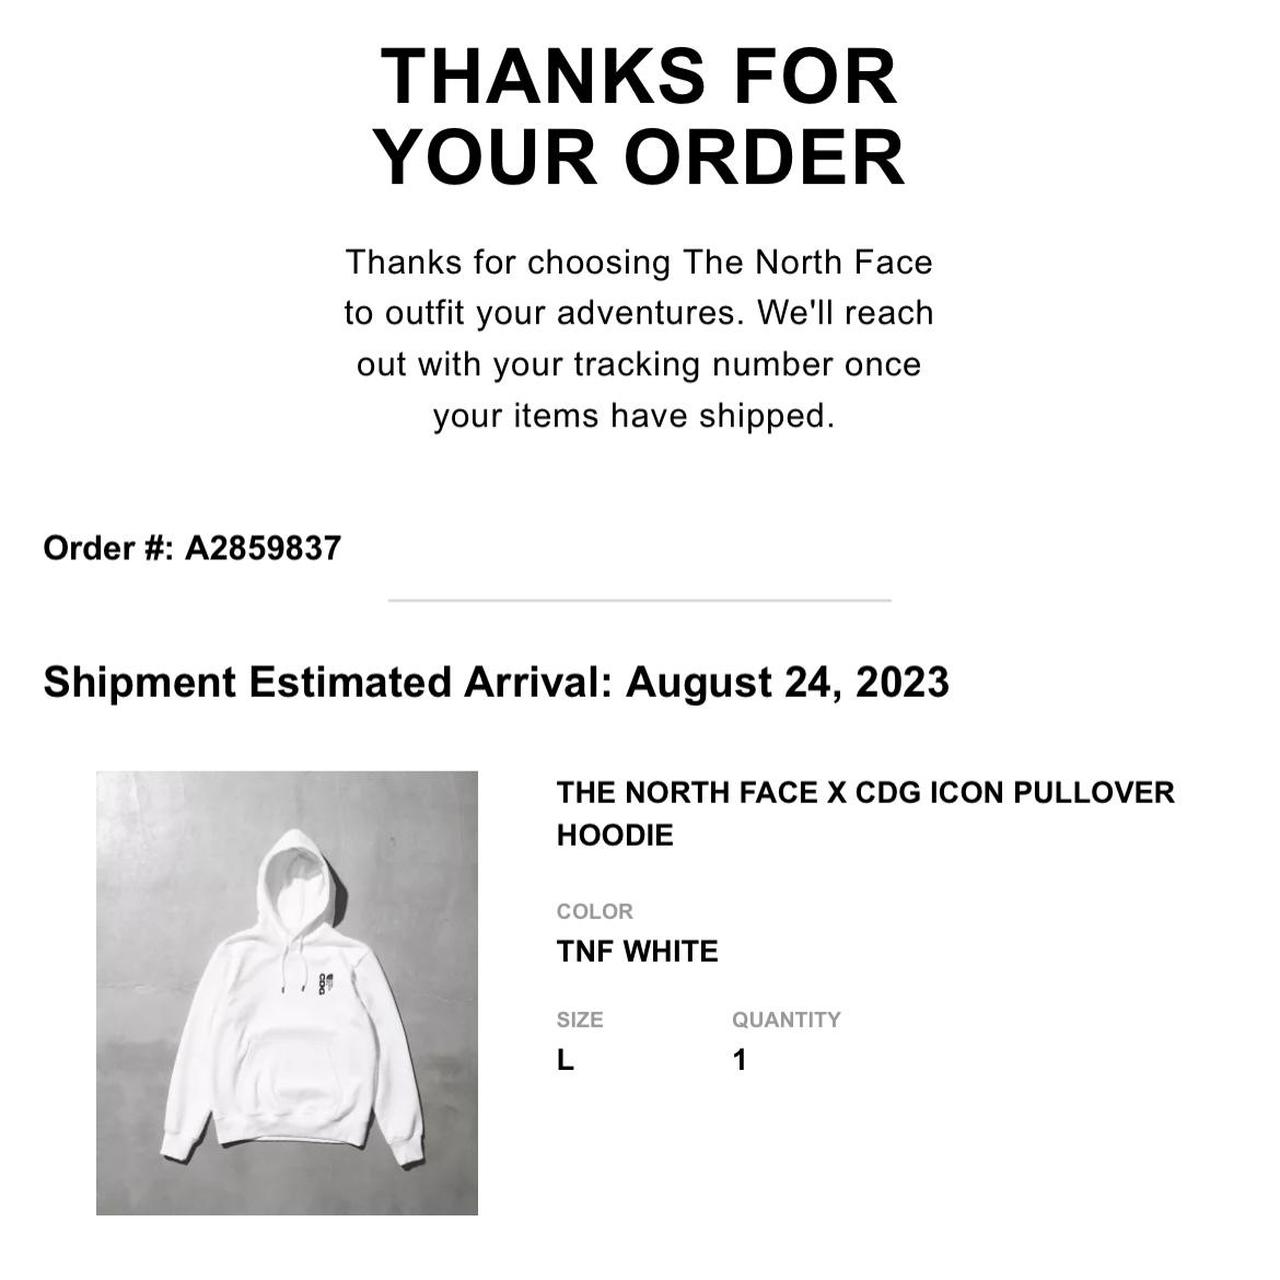 The North Face x CDG Icon PulloverHoodieコムデギャルソン